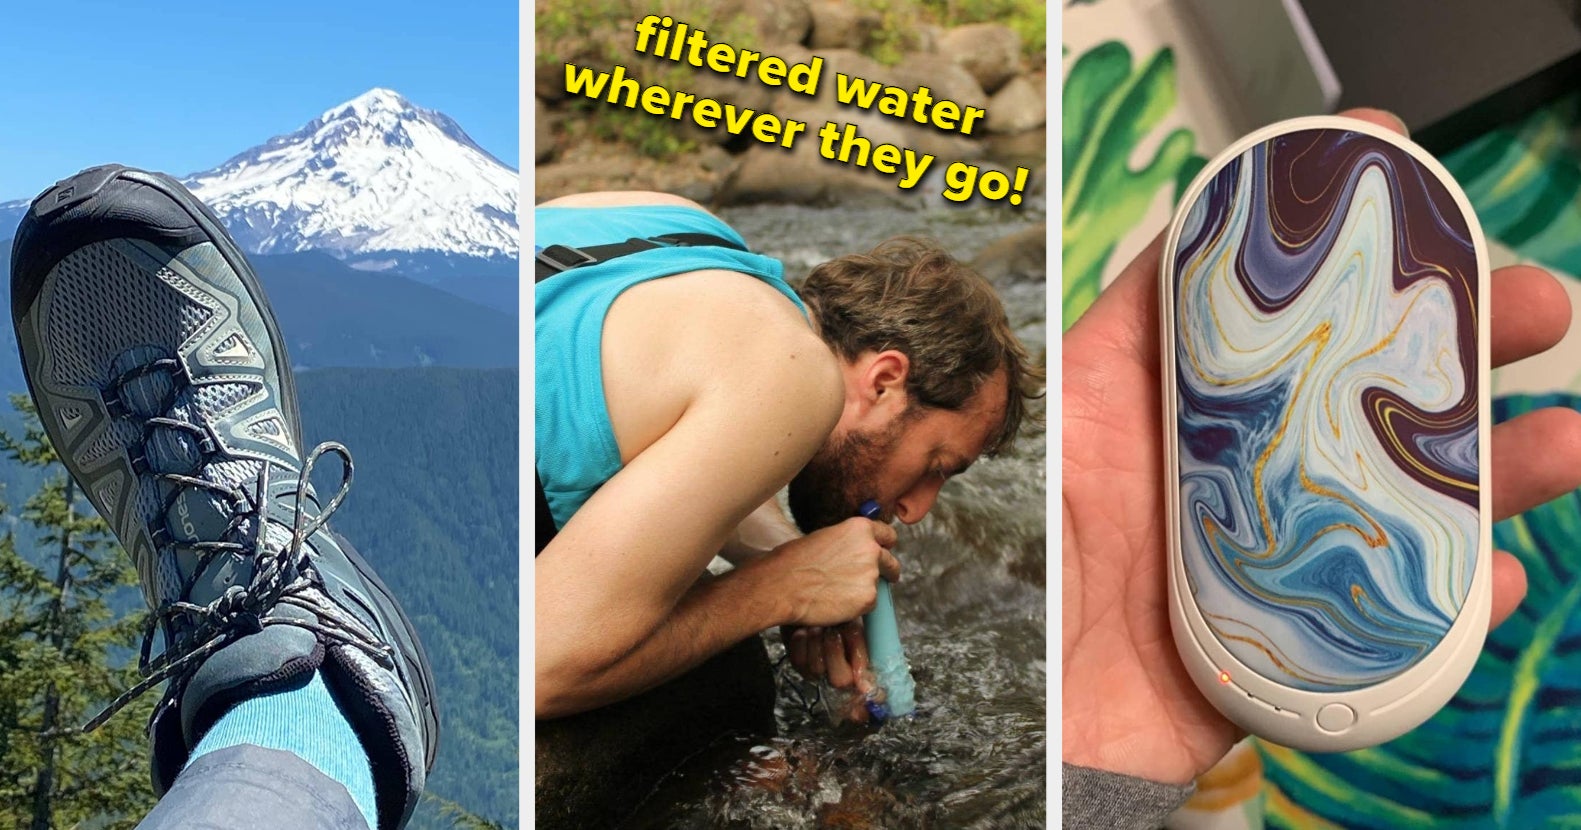 27 Outdoorsy Gifts That Are So Practical They'll Thank You For Making Them  A Master Camper